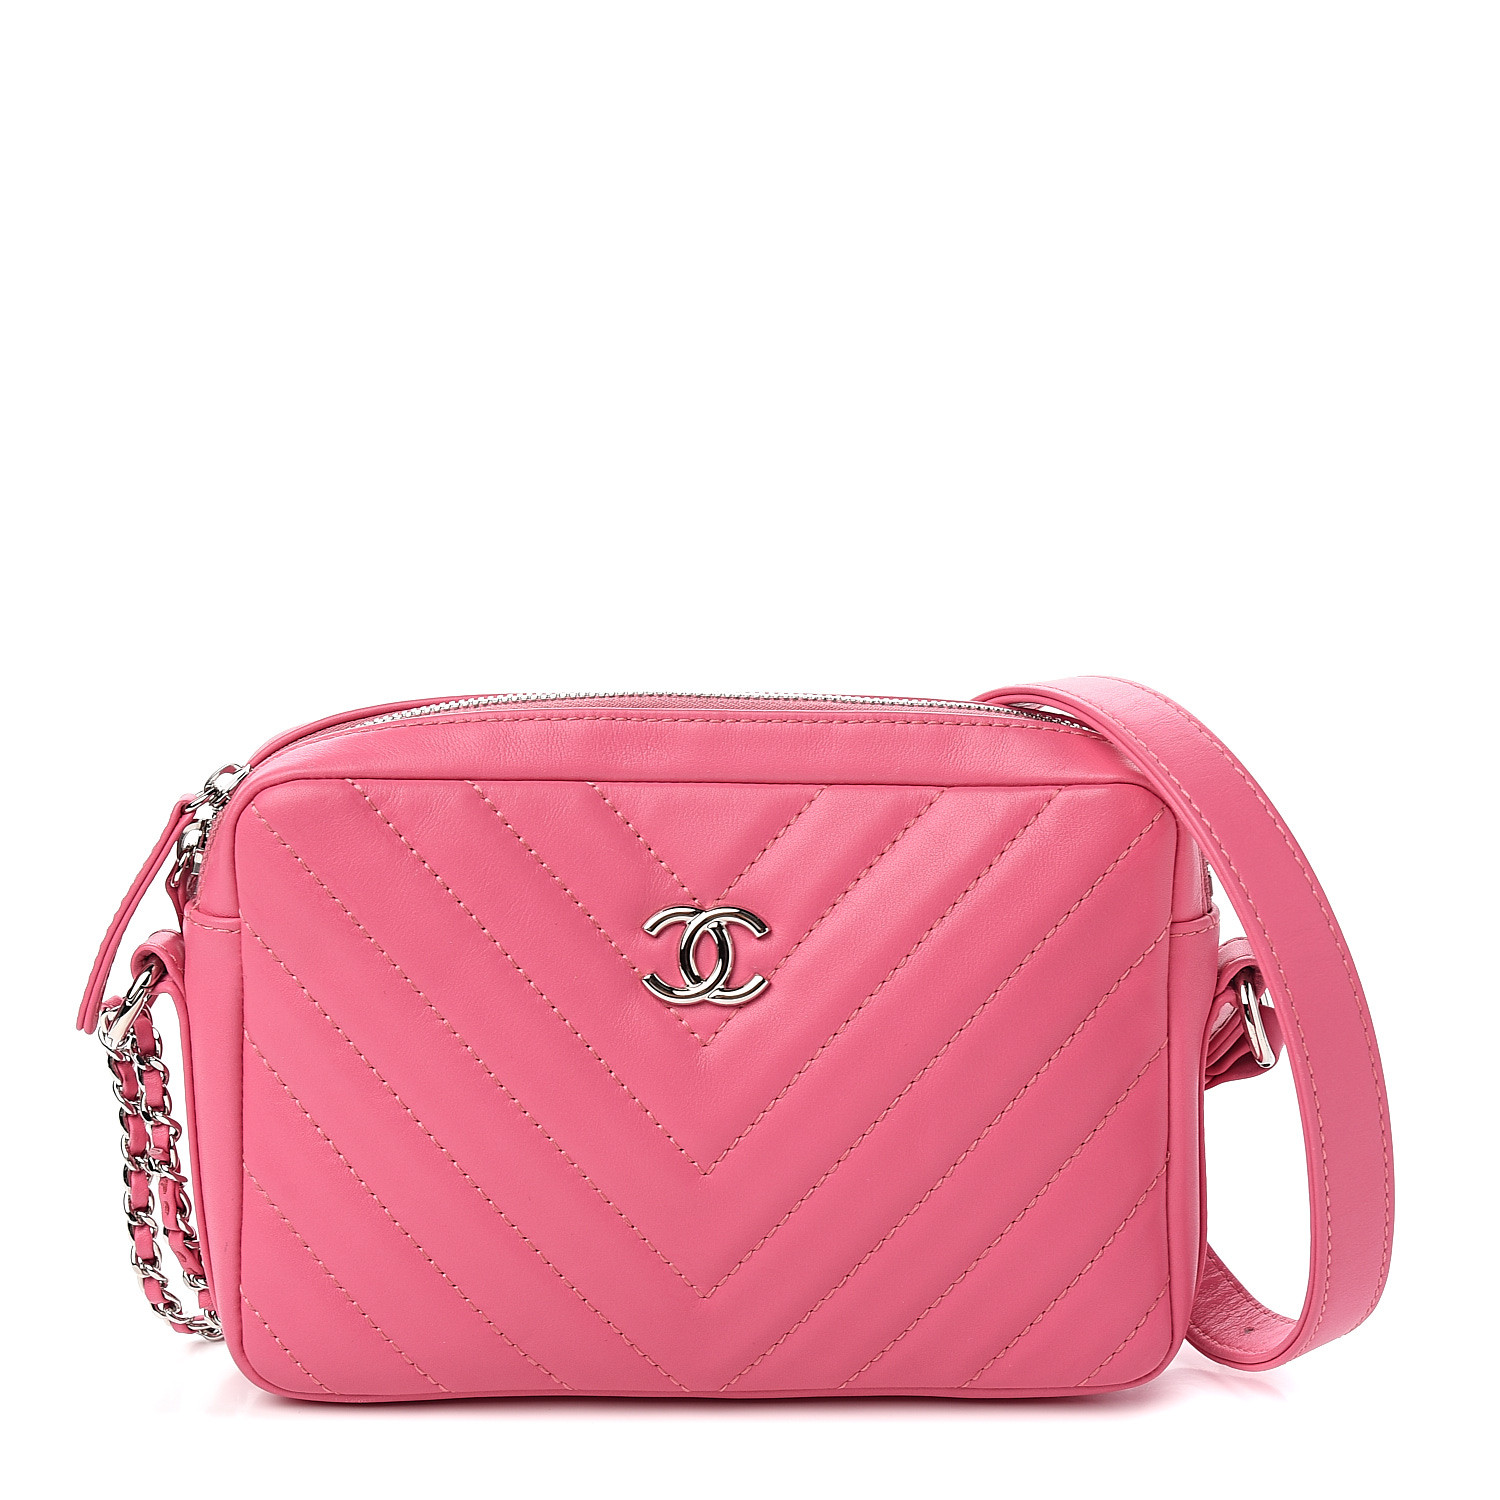 CHANEL Lambskin Chevron Quilted Small Promenade Camera Case Pink 552398